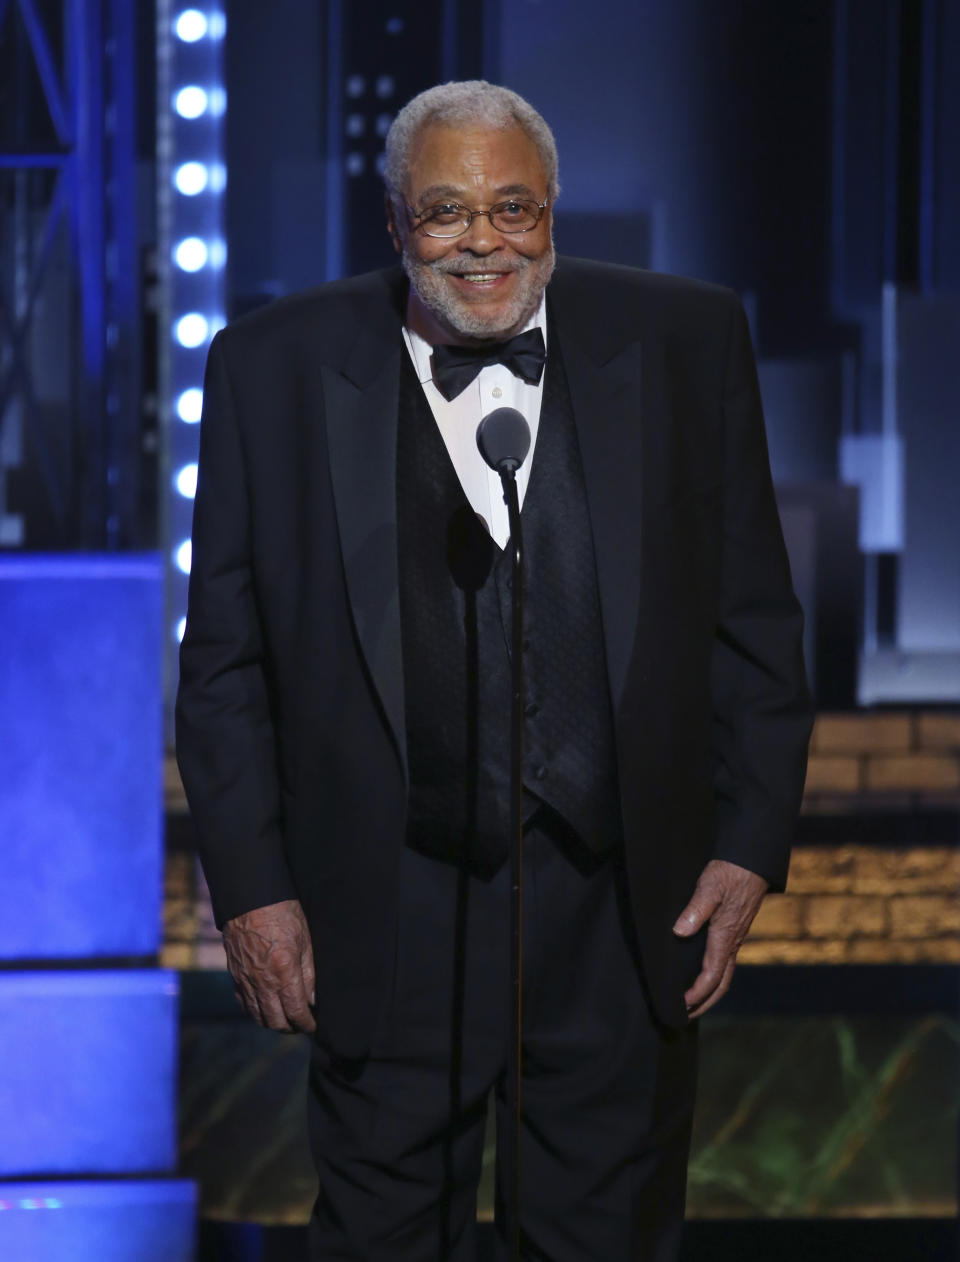 FILE - James Earl Jones accepts the special Tony award for Lifetime Achievement in the Theatre at the 71st annual Tony Awards on June 11, 2017, in New York. Jones turns 92 on Jan. 17. (Photo by Michael Zorn/Invision/AP, File)